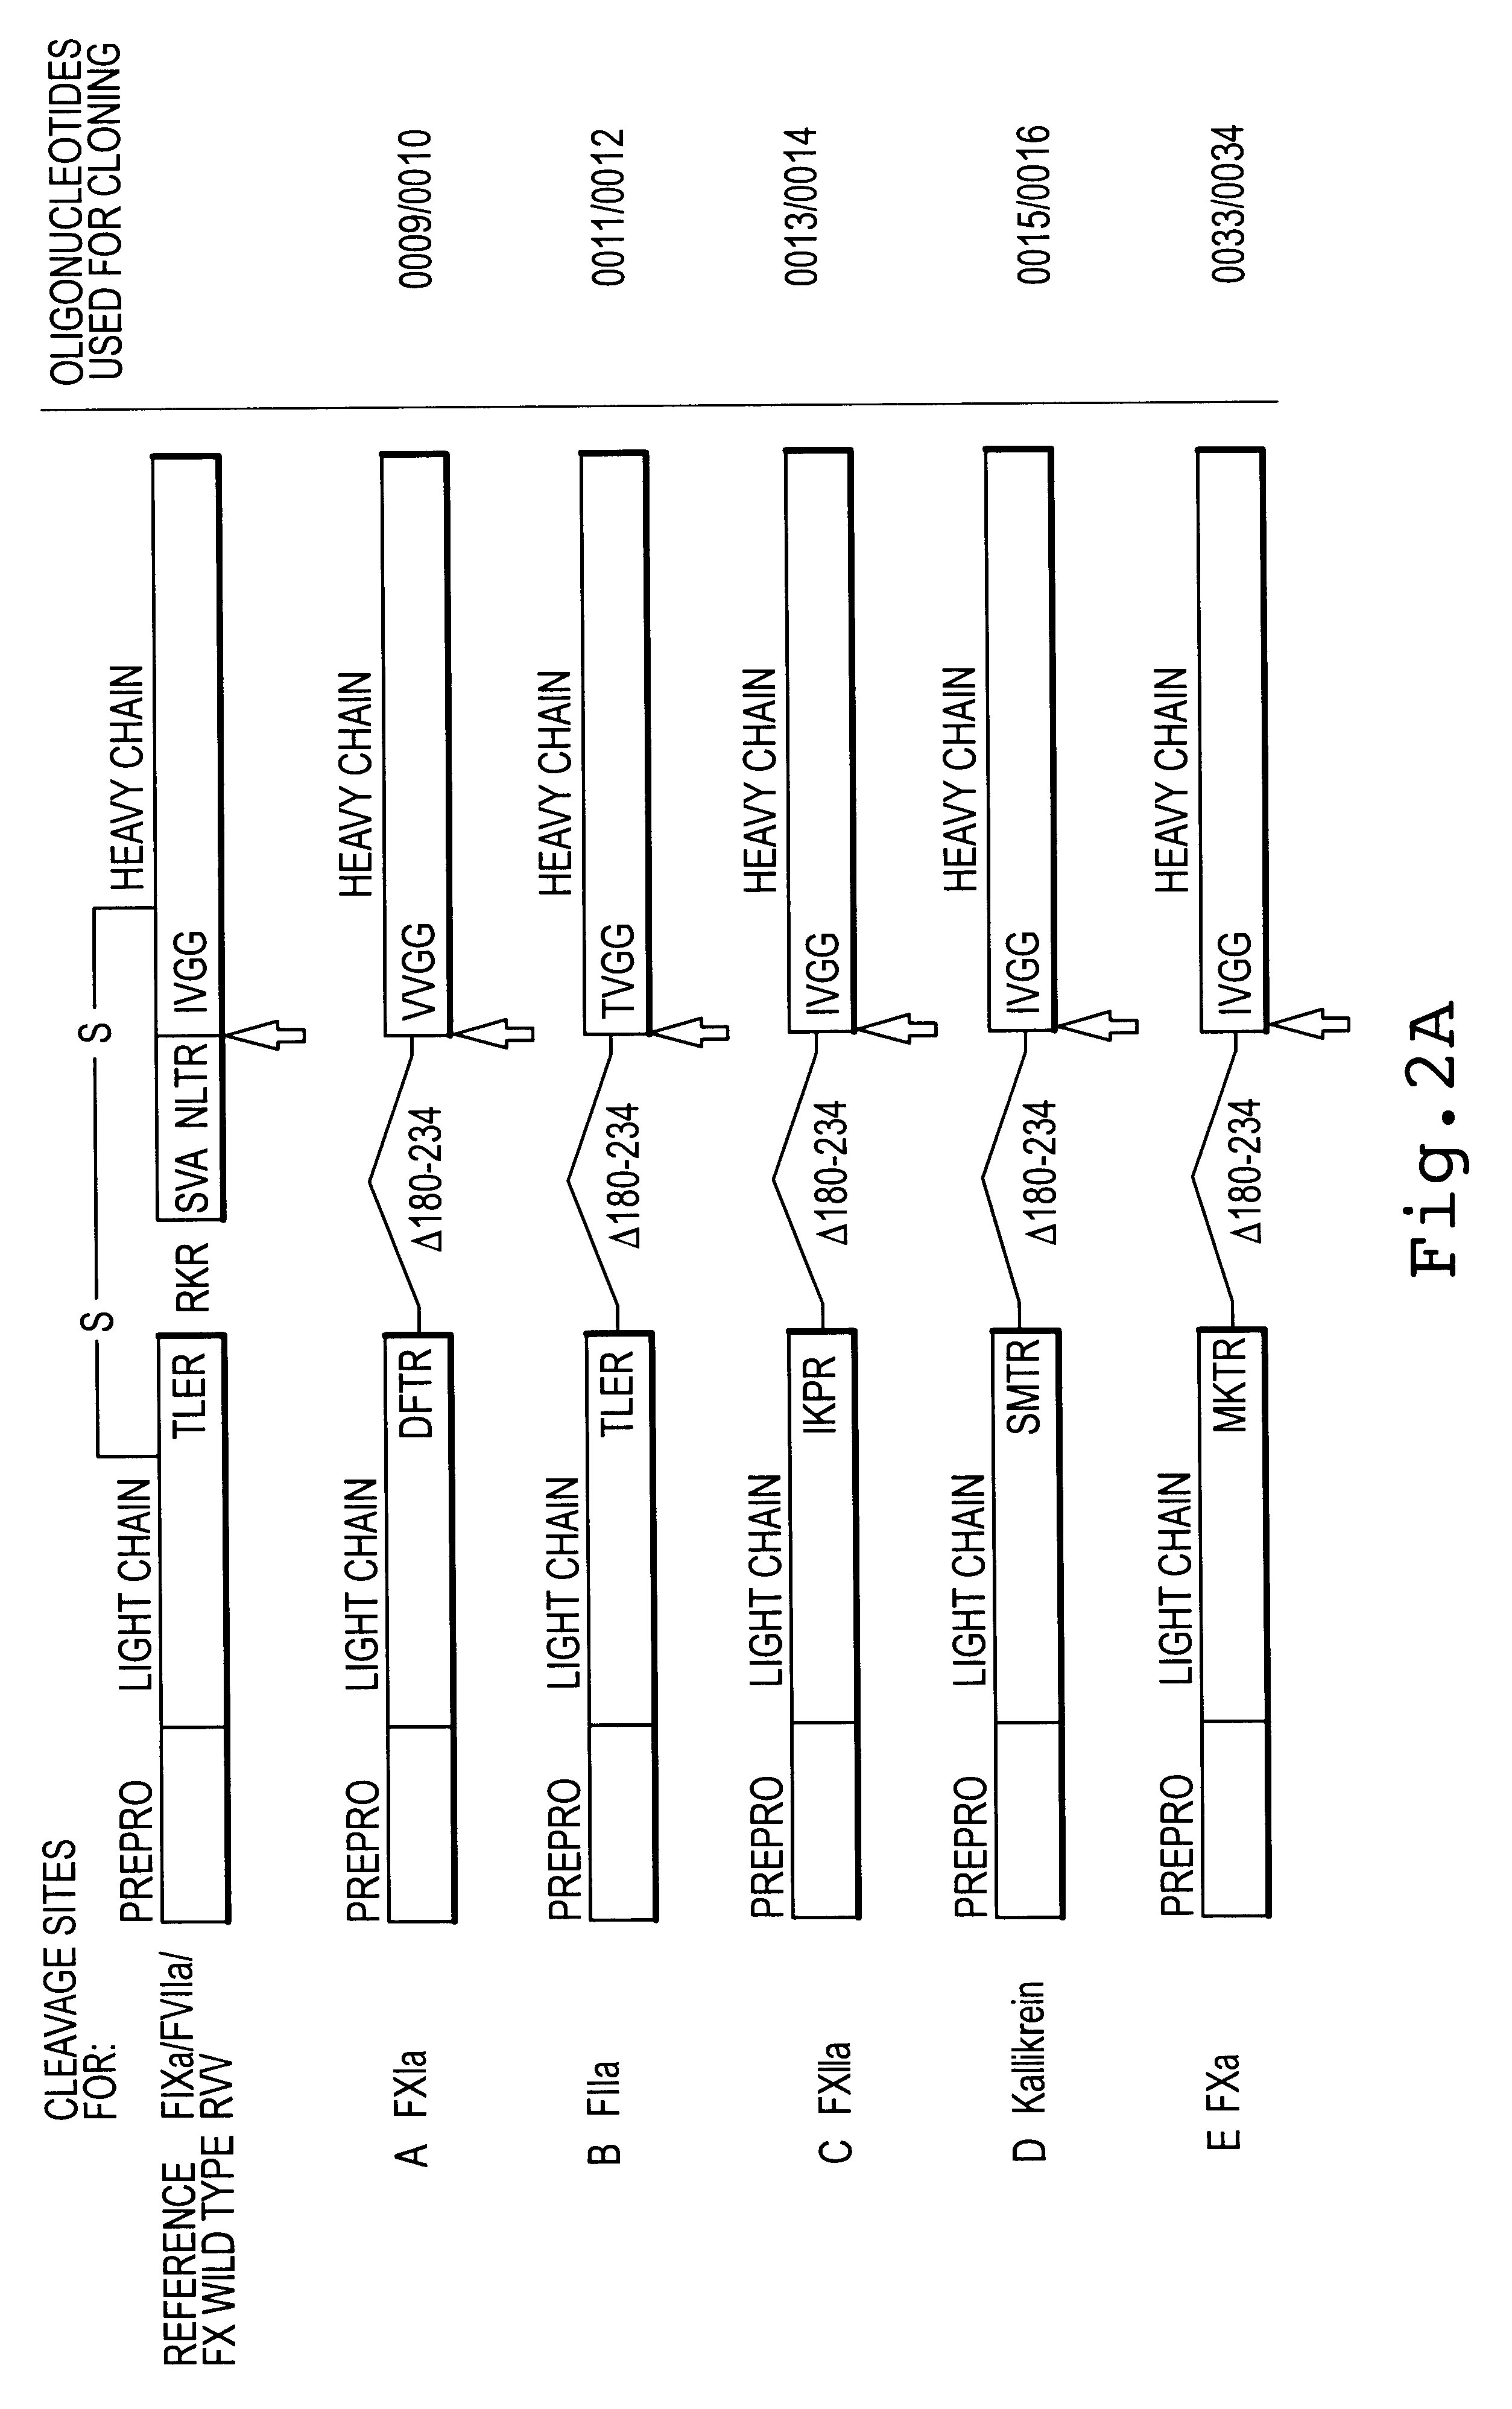 Factor X deletion mutants and analogues thereof